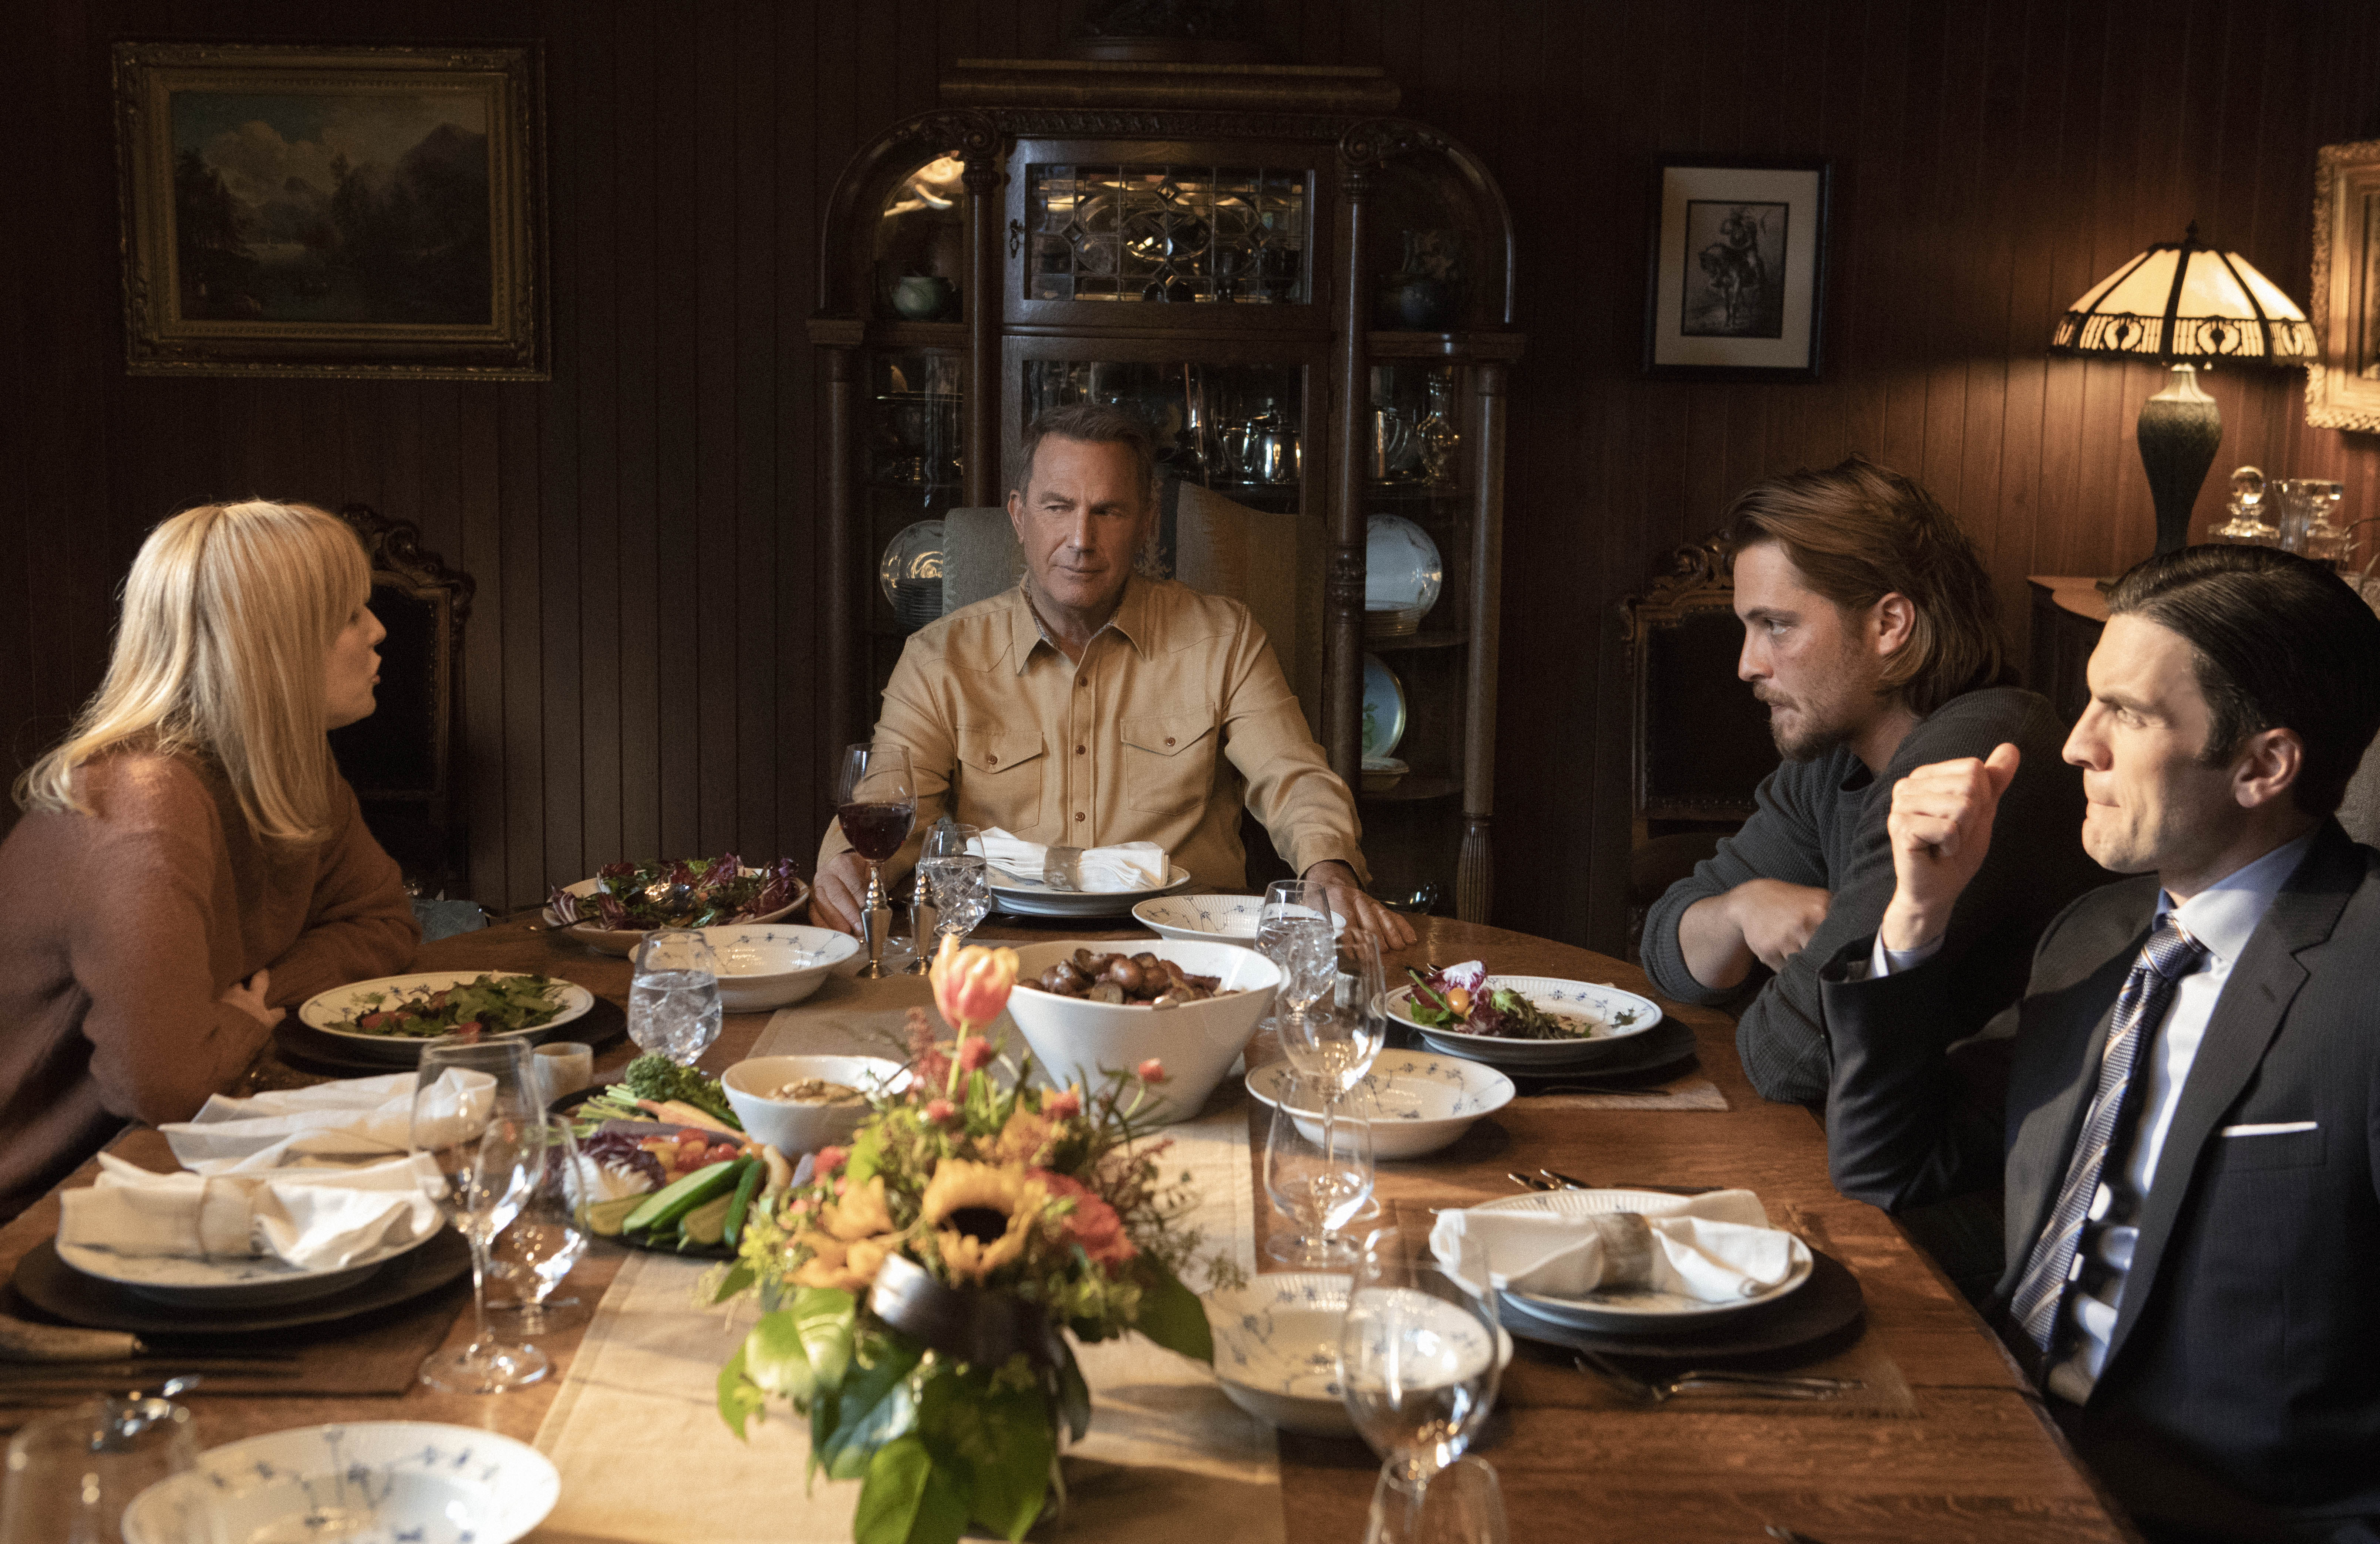 Actors from TV show Yellowstone sitting at dinner table